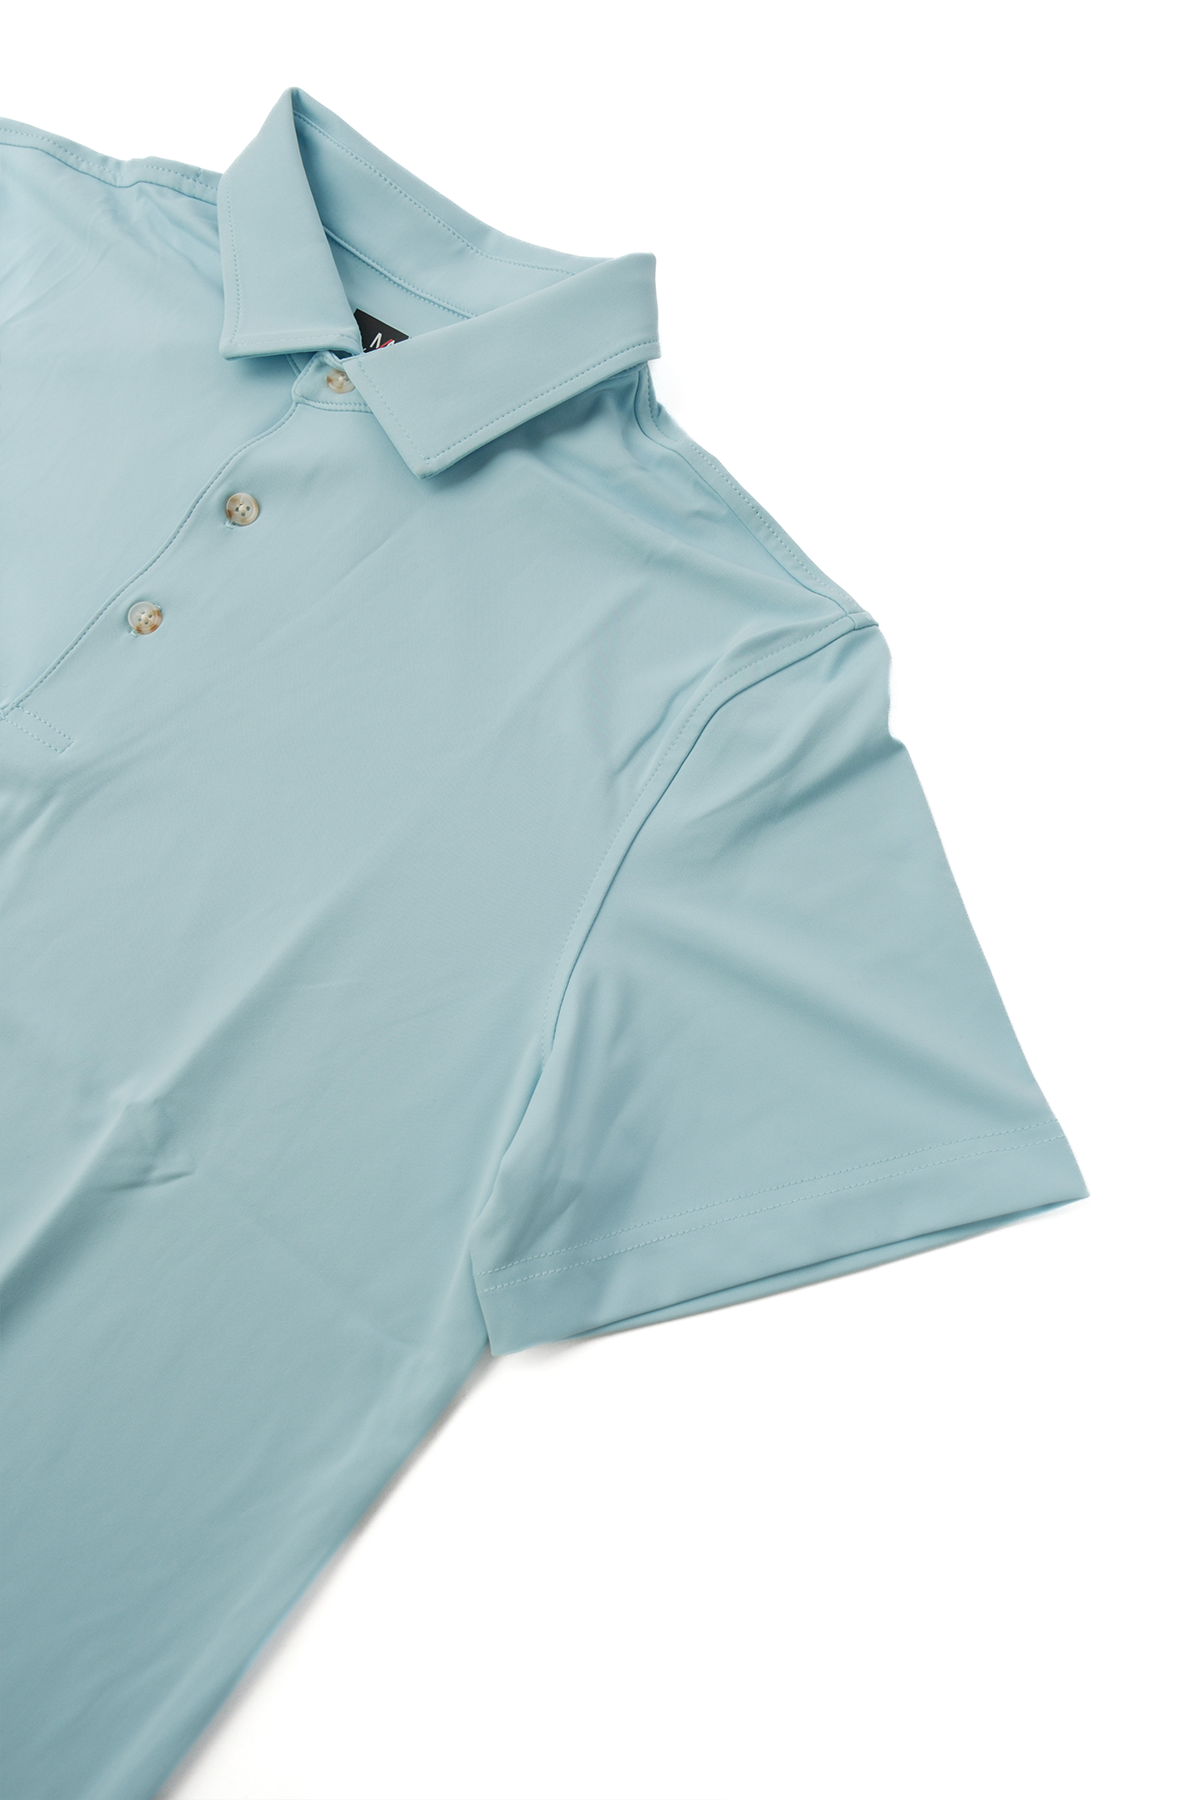 Light blue golf polo laid flat on a white background.